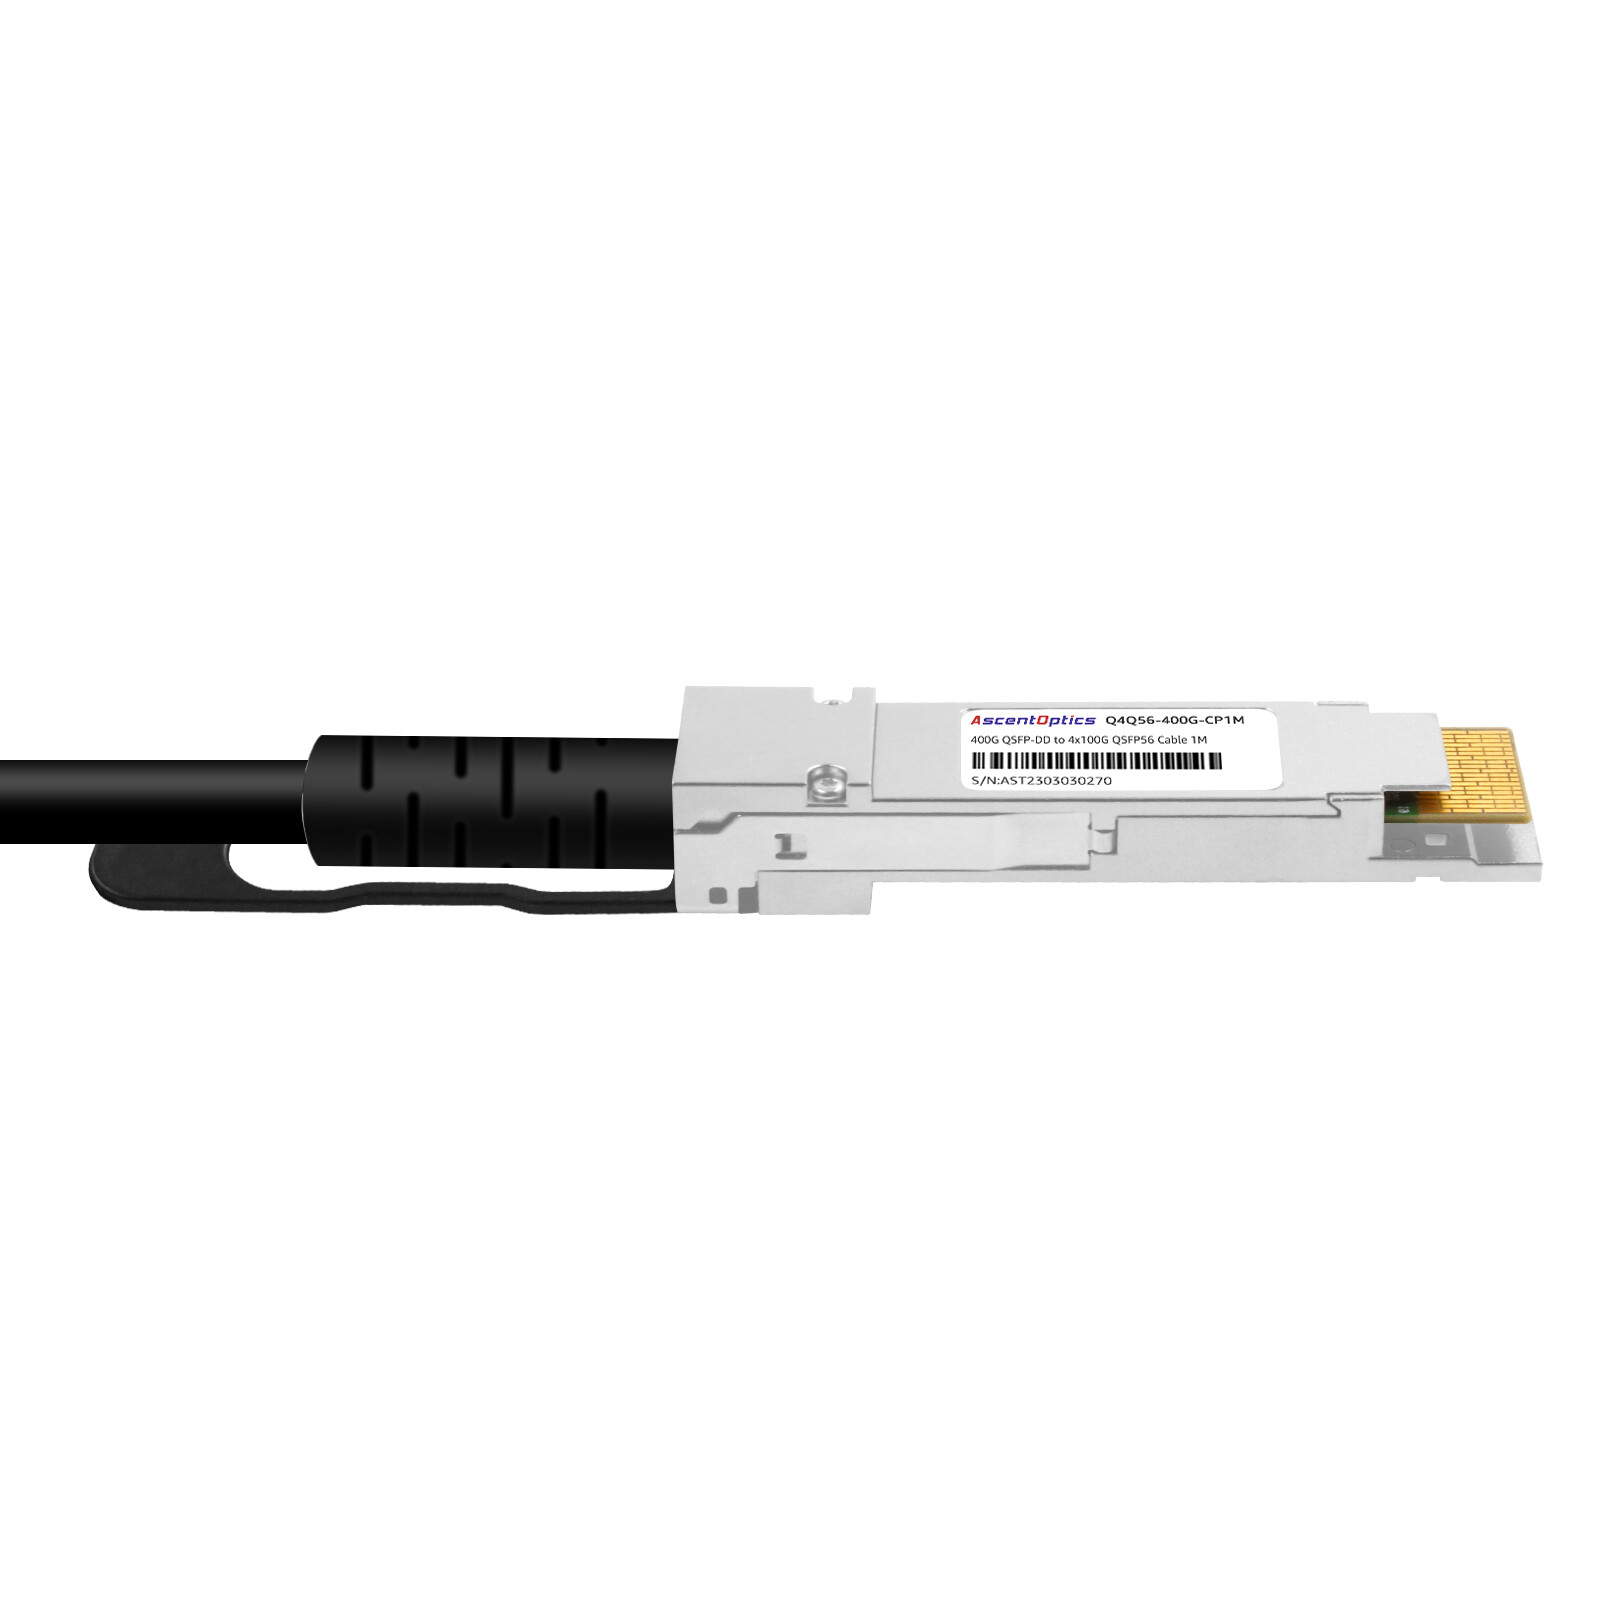 400G QSFP-DD to 4x 100G QSFP56 Copper Breakout Cable,1 Meter,Passive